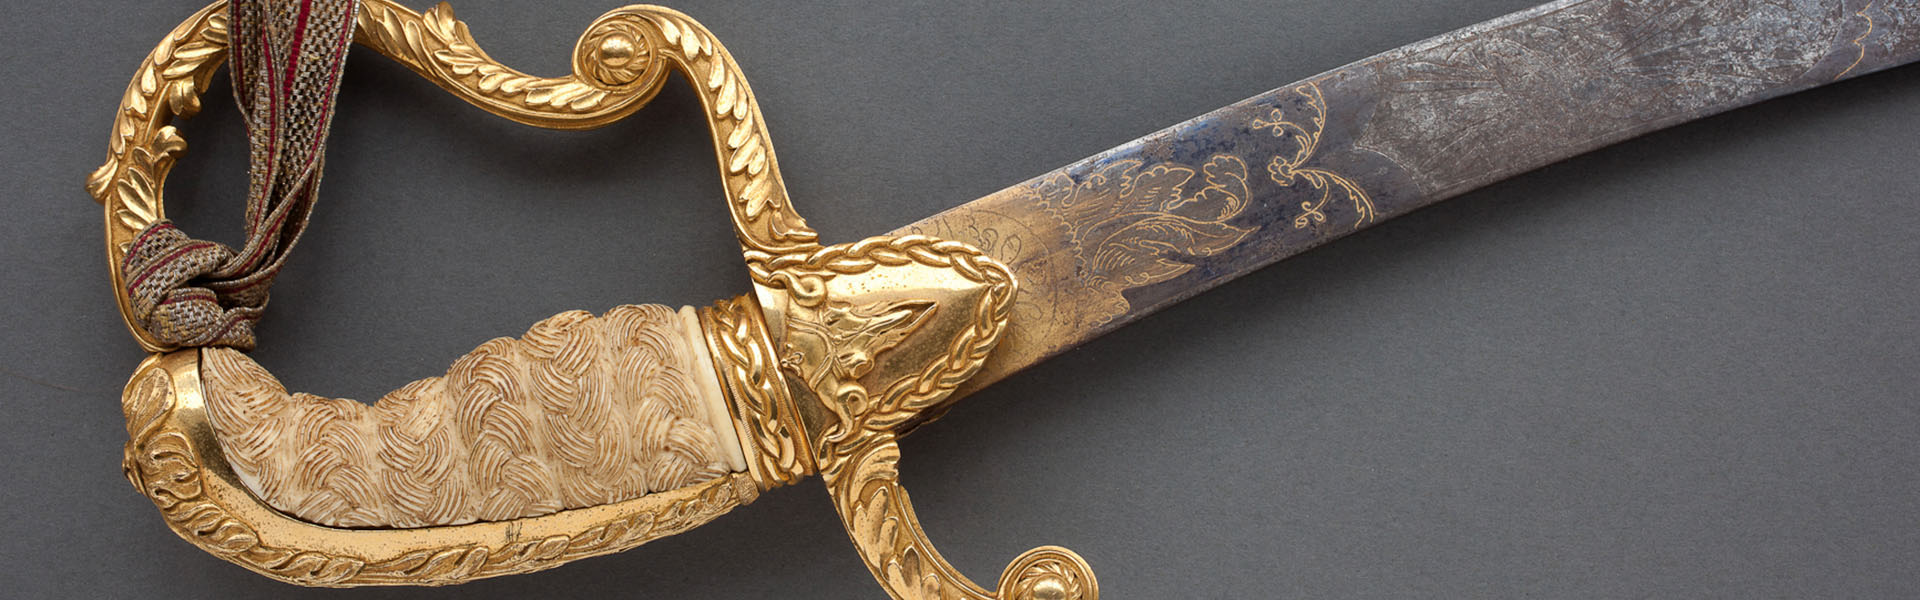 Sword from the Sheaffe Collection